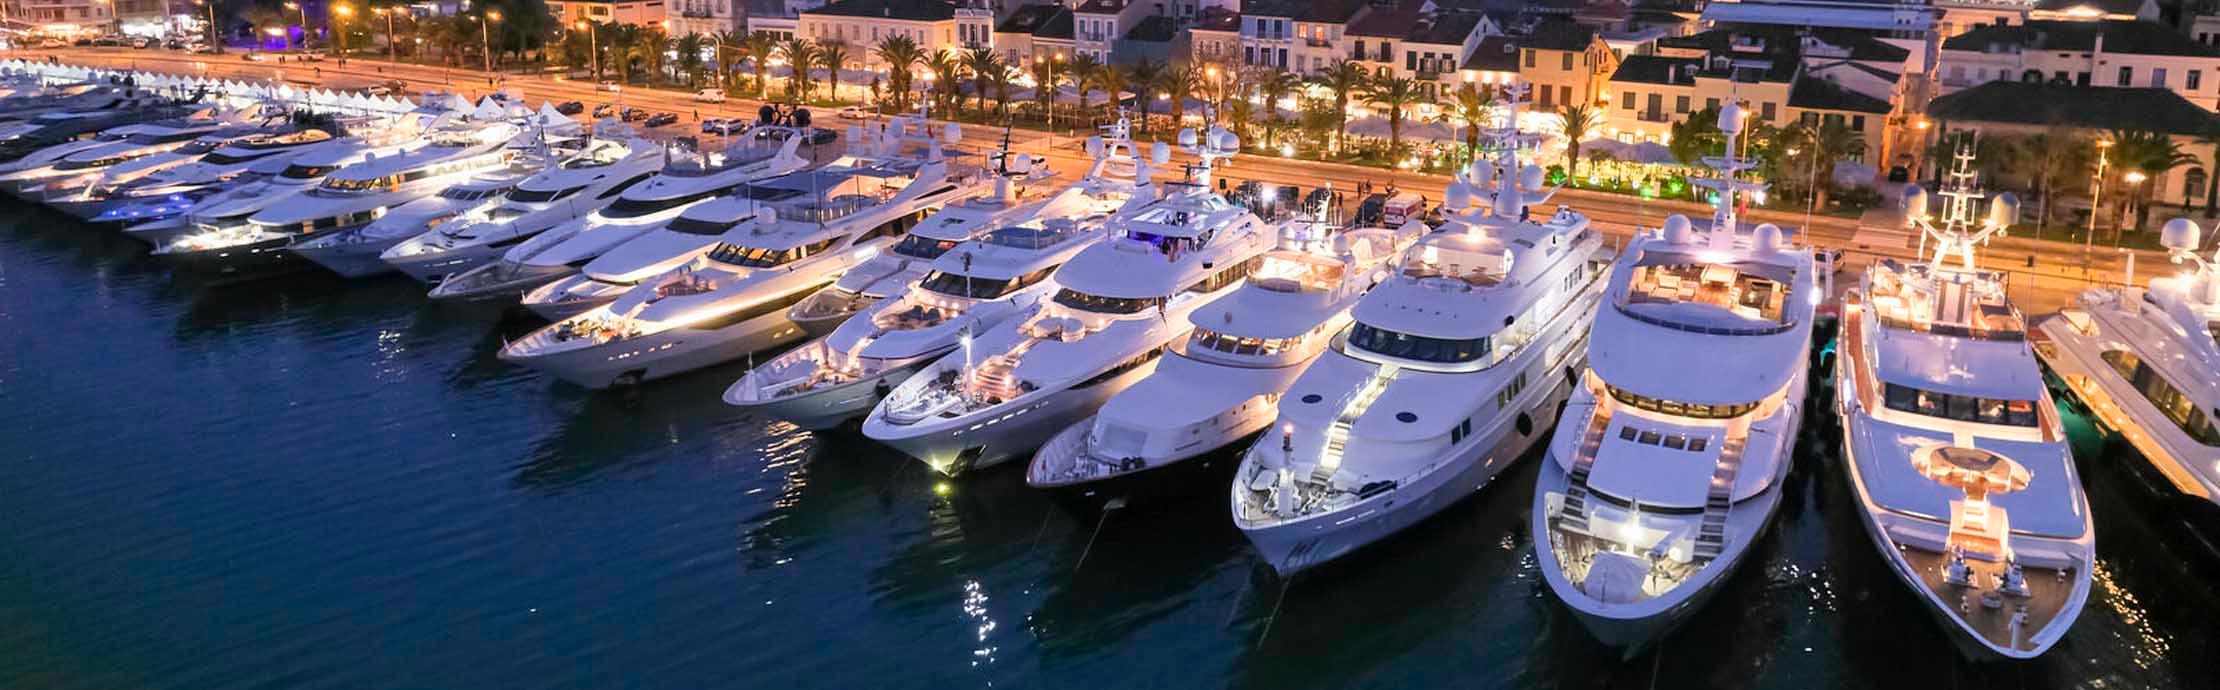 2022 Mediterranean Yacht Show: Chef’s Competition Winners